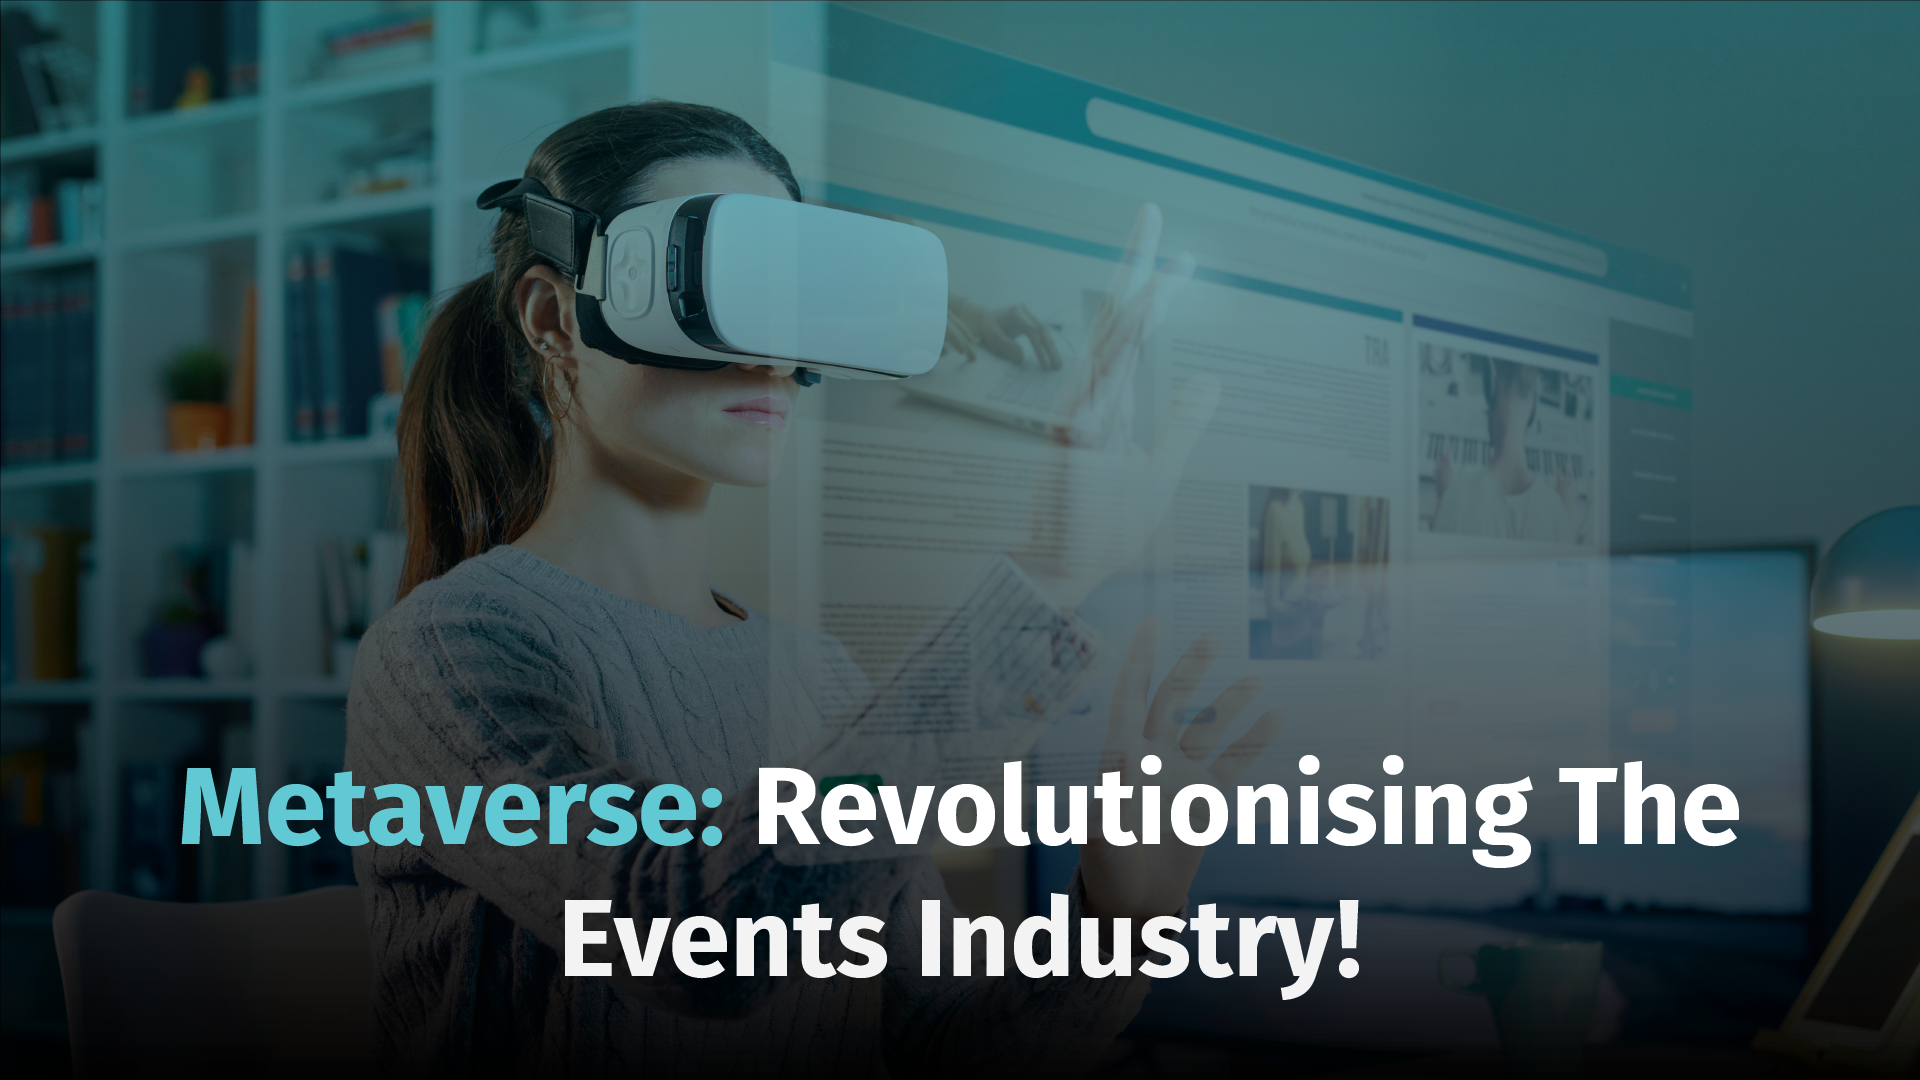 Virtual Meets Reality: Exploring The Potential Of Metaverse On The Business Events Industry